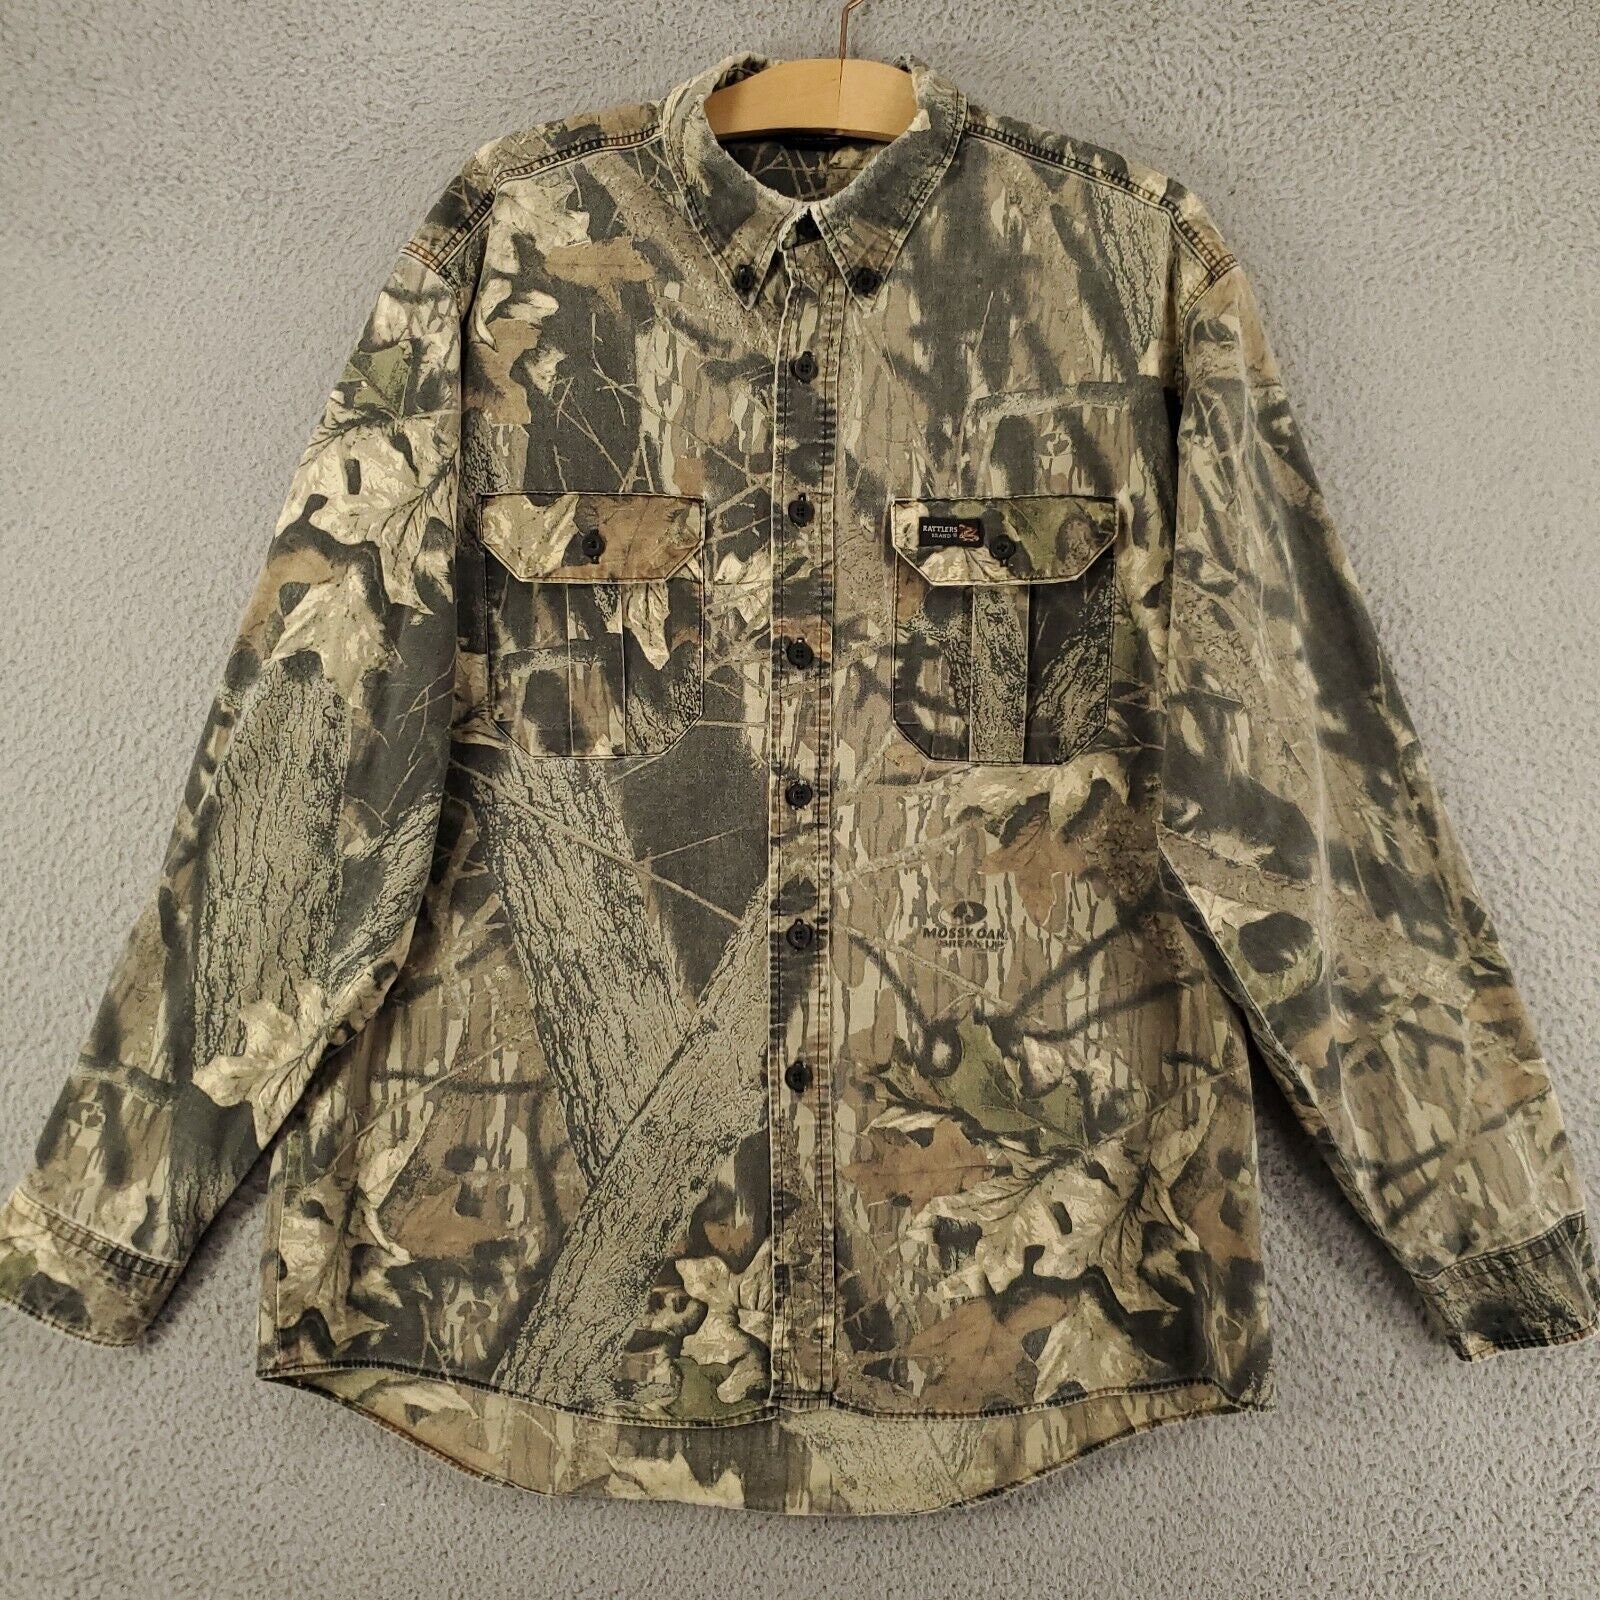 Vintage Rattlers Brand Camo Shirt Mens Large Realtree Breakup Hunting  Distressed Camoflauge Long Sleeve Button Down 